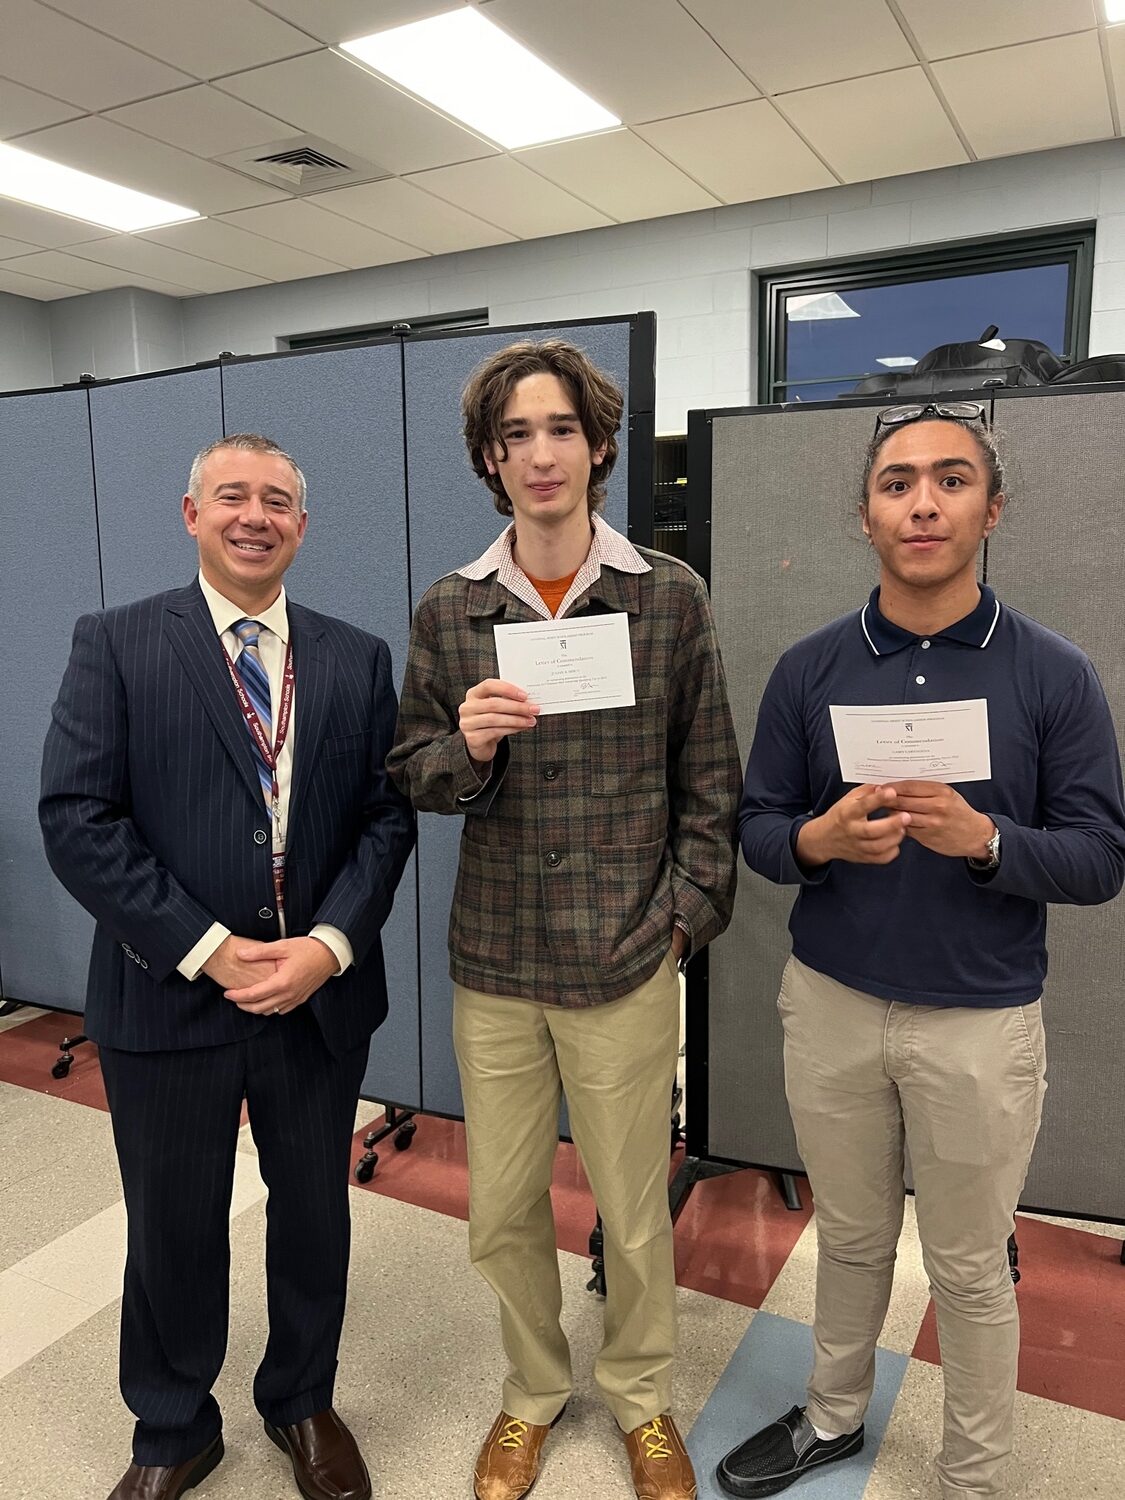 Southampton High School seniors Julian Misut and Casey Cartagena have been named National Merit Commended students and are congratulated by Principal Brian Zahn. COURTESY SOUTHAMPTON SCHOOL DISTRICT